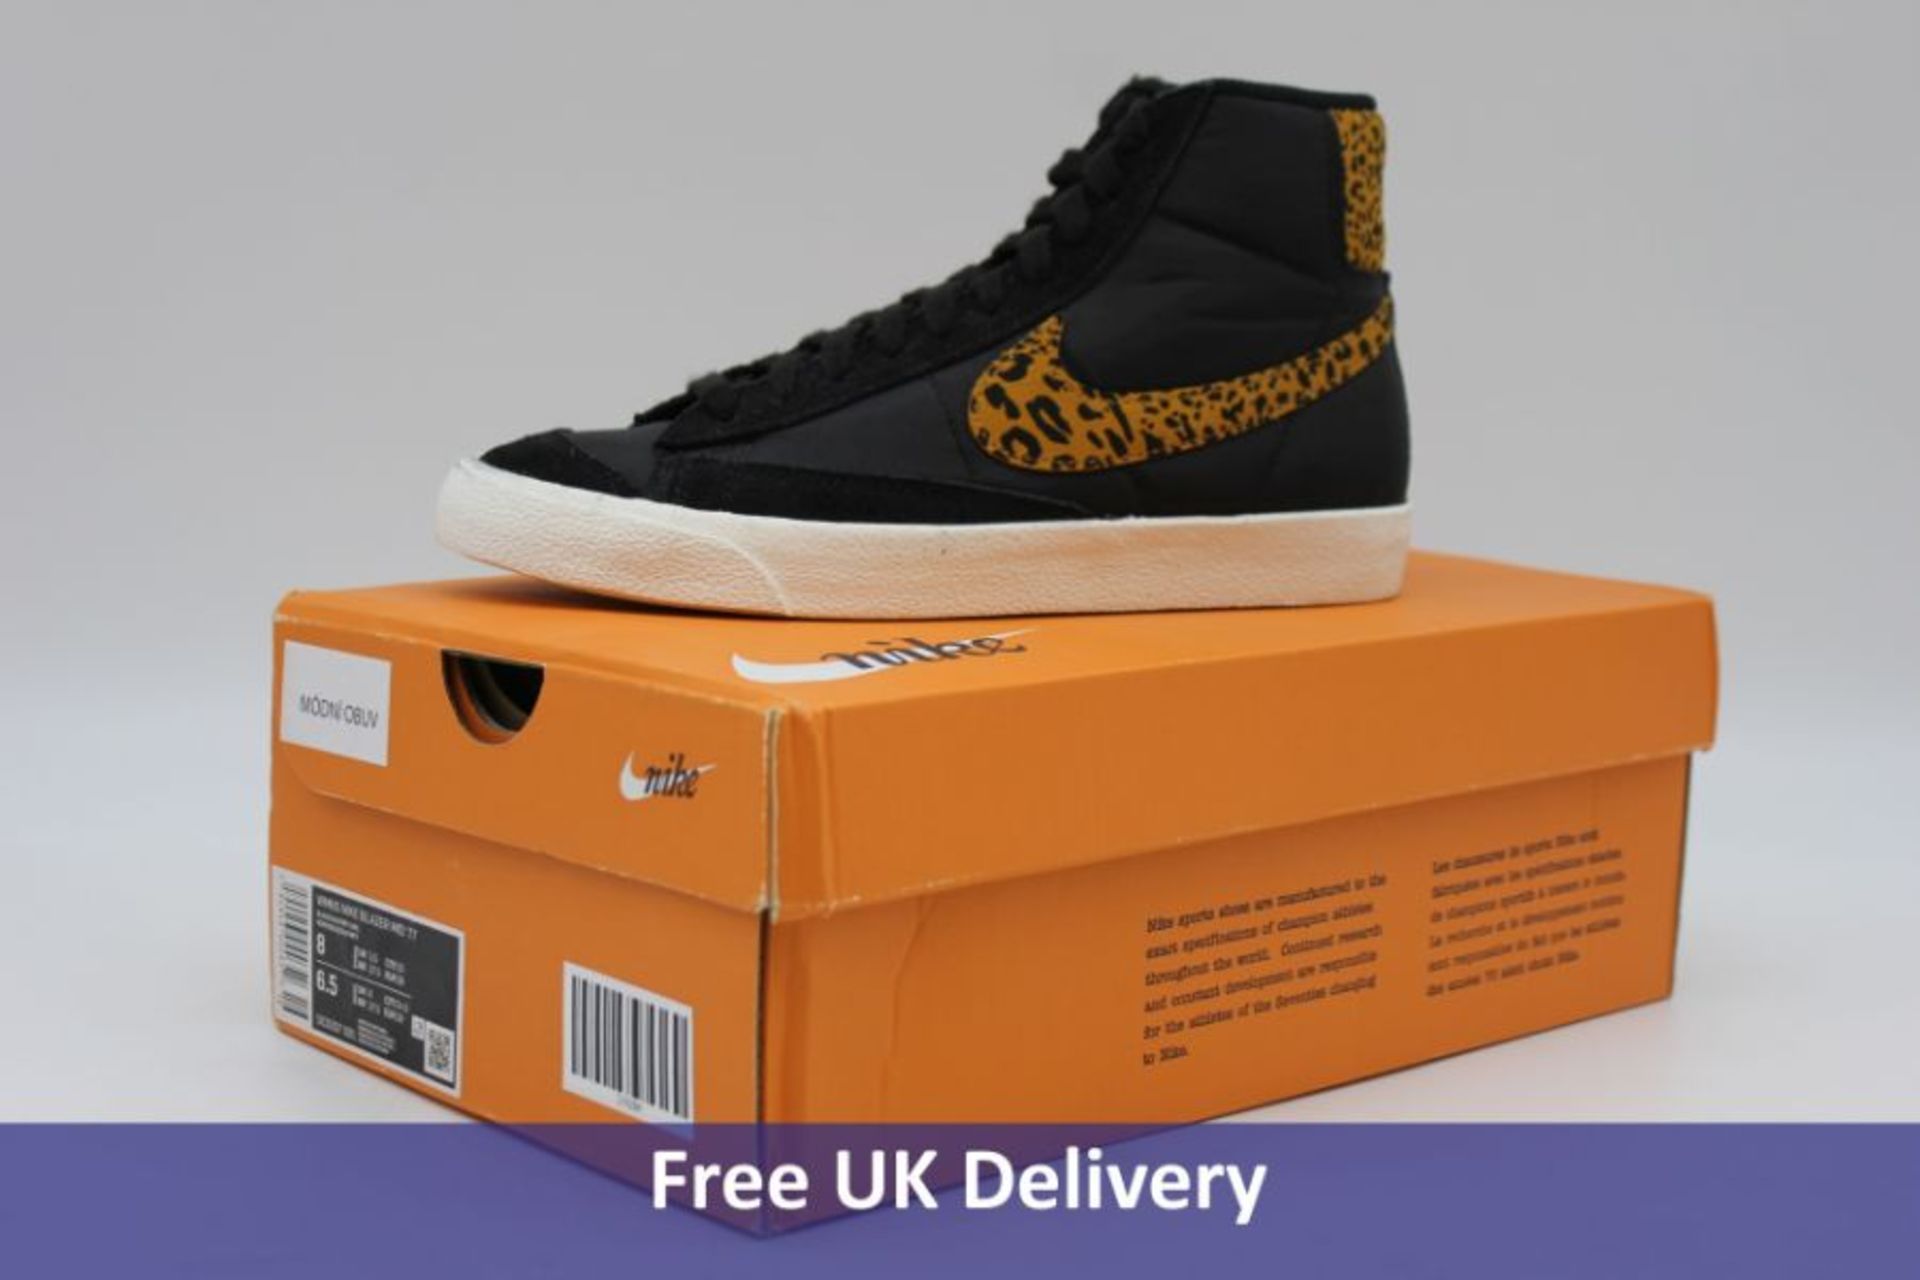 Two Nike Women's Trainers to include 1x Blazer Mid '77, Black/Leopard Print Logo, UK 5.5 and 1x Air